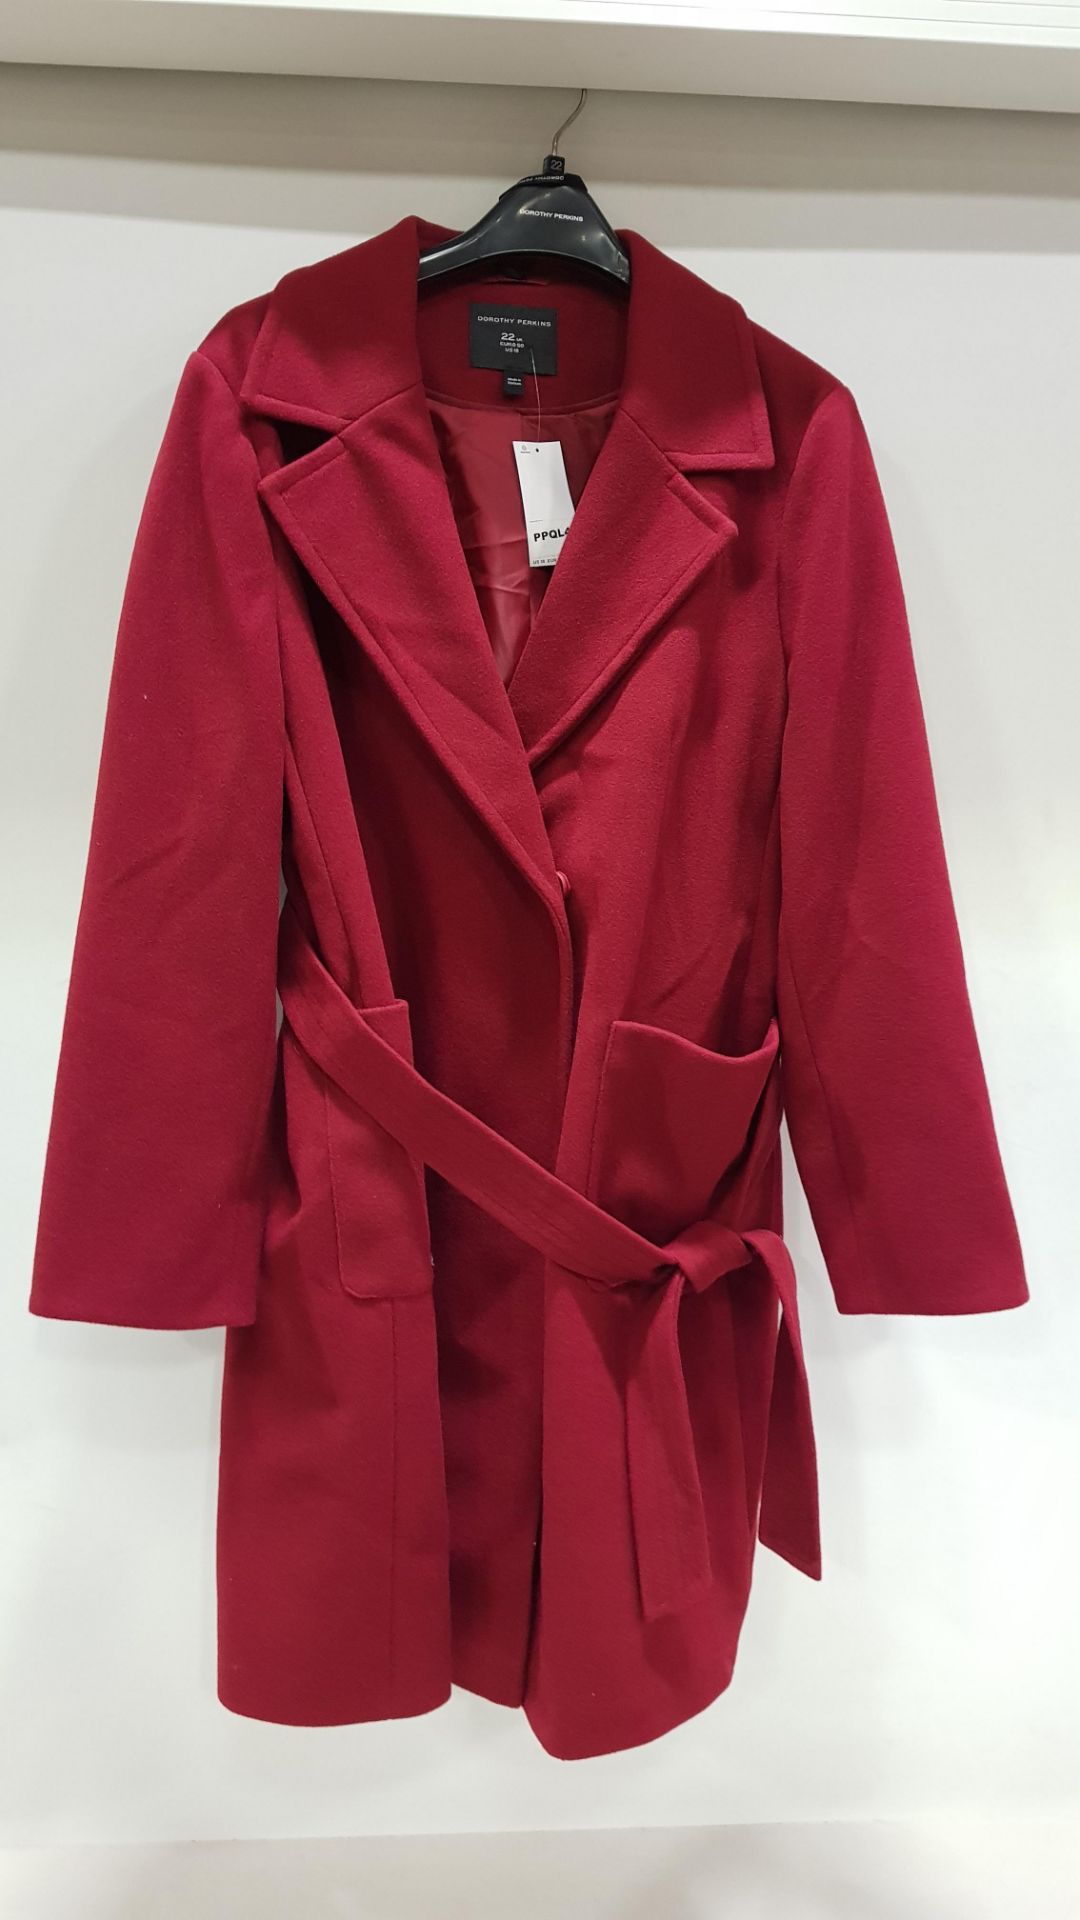 5 X BRAND NEW DOROTHY PERKINS RED LONG BUTTONED COATS WITH BELT SIZE UK 6